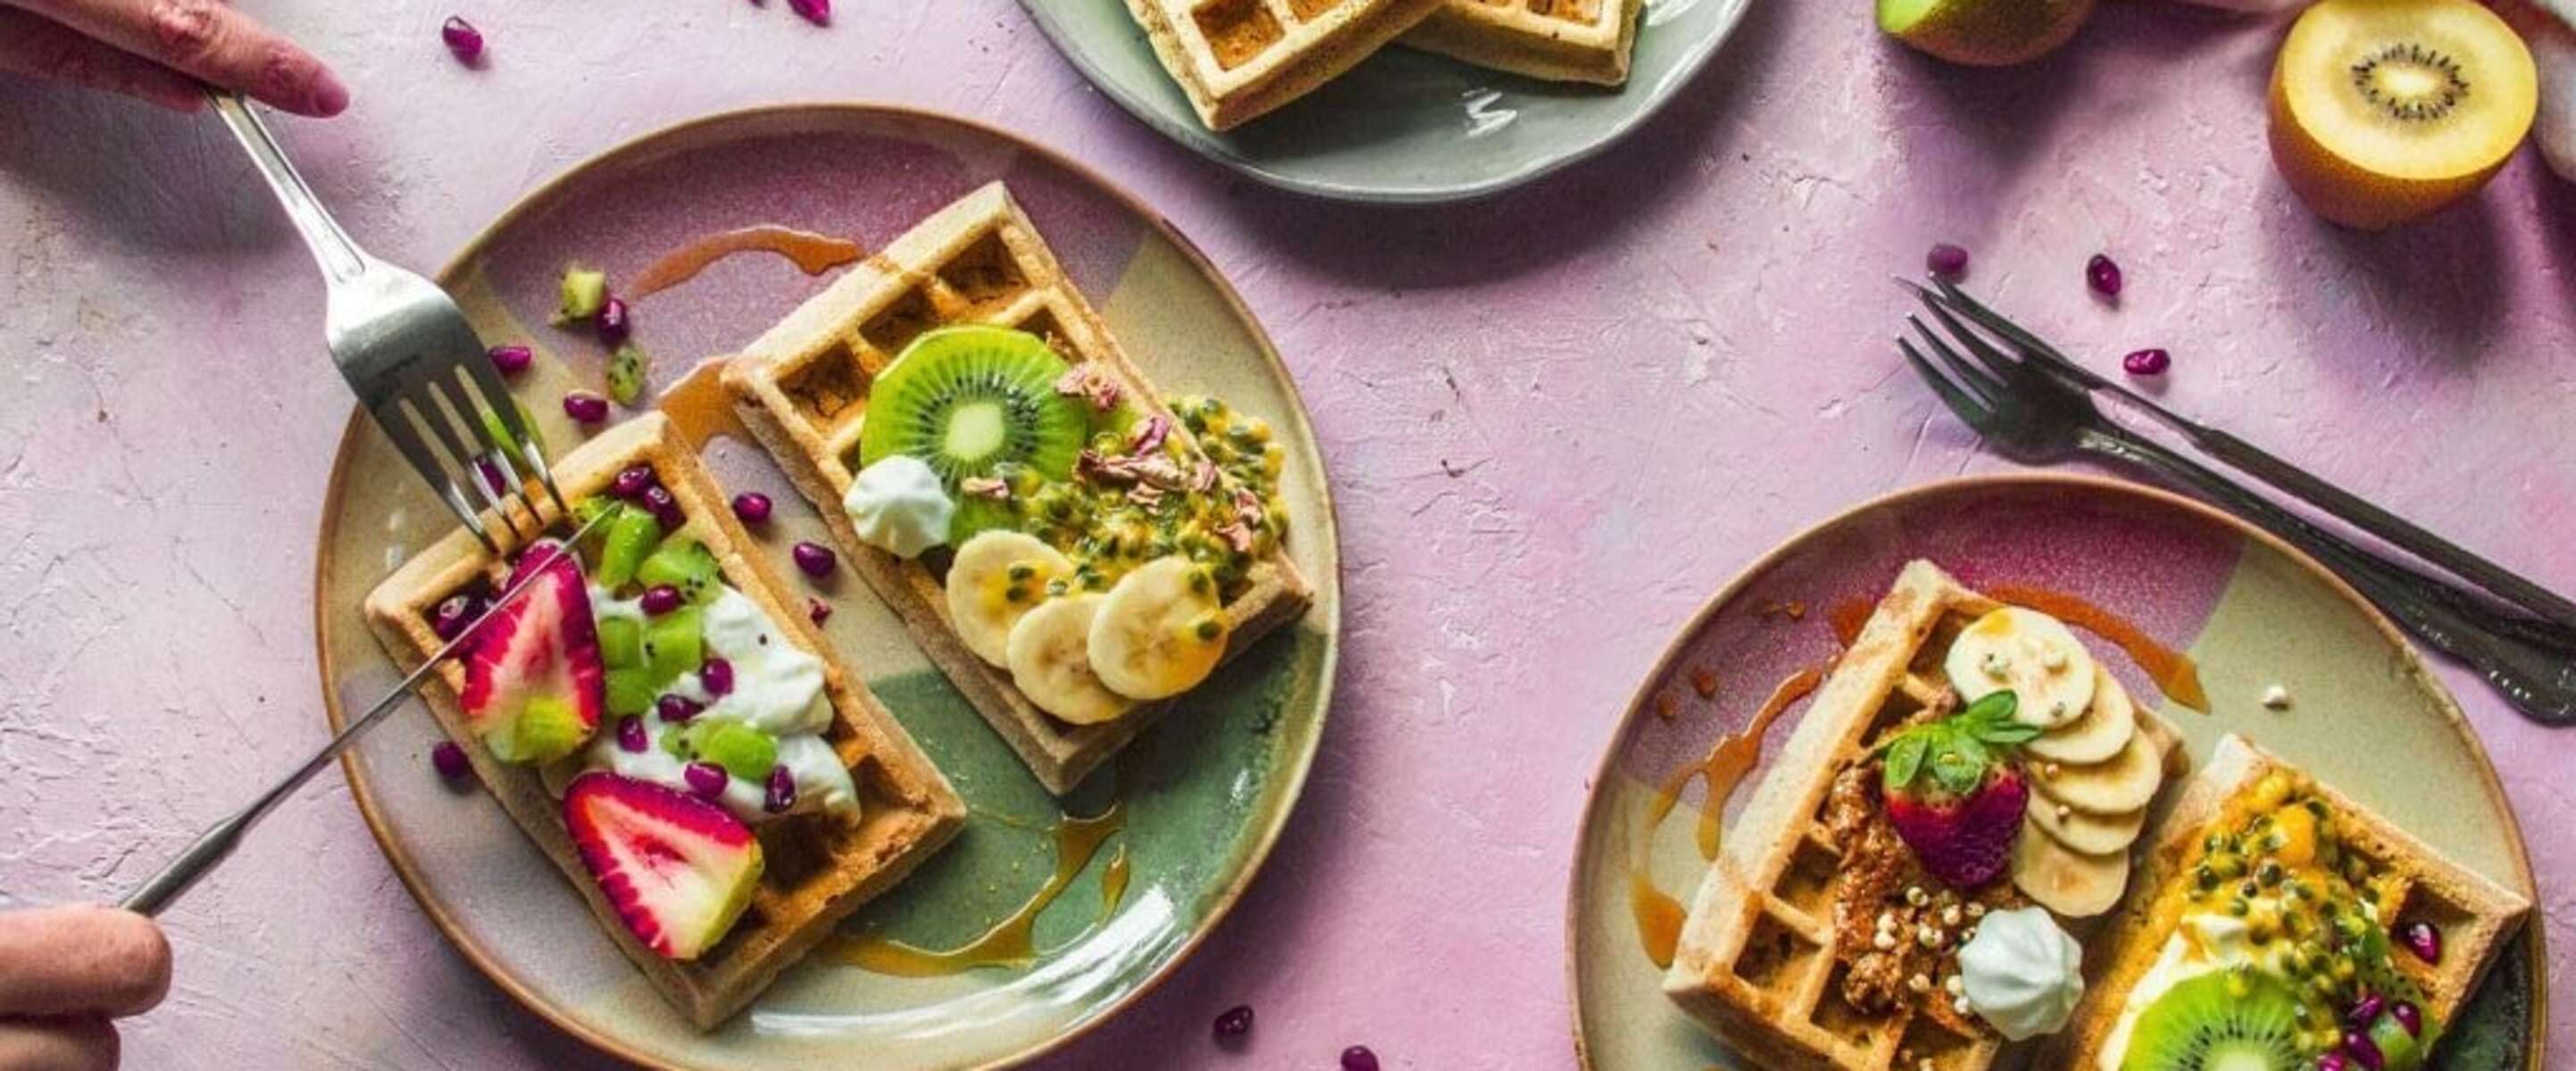 Eggs Not Required: 14 Vegan Recipes for Easter Brunch